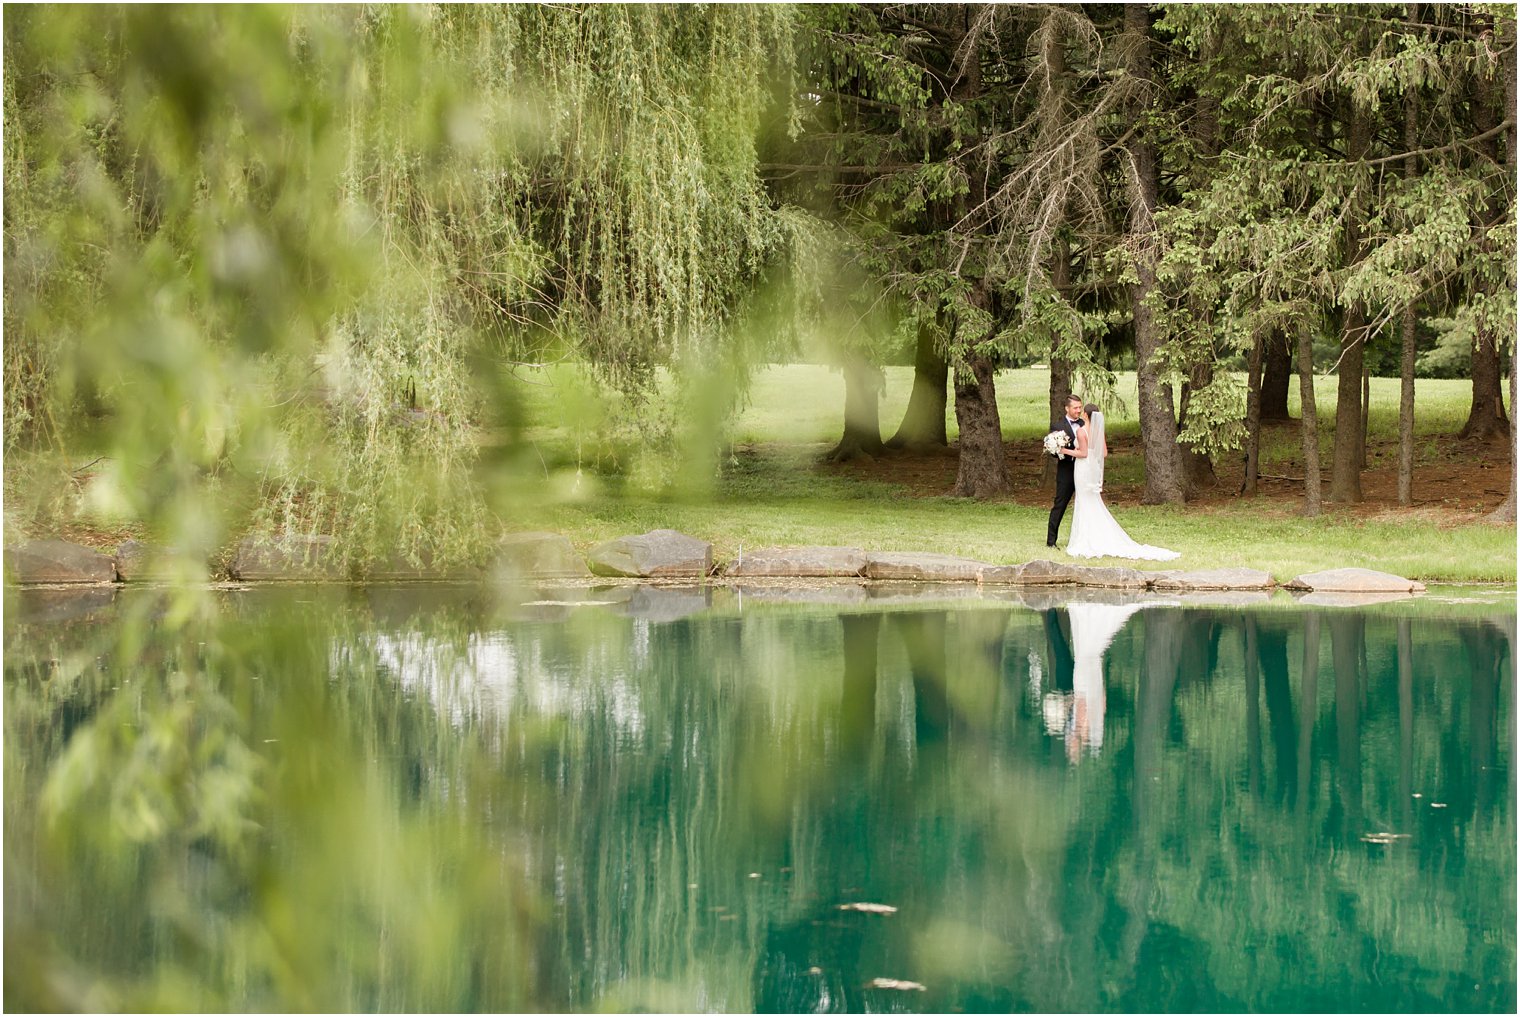 Bride and groom among weeping willow trees | Photos by Idalia Photography